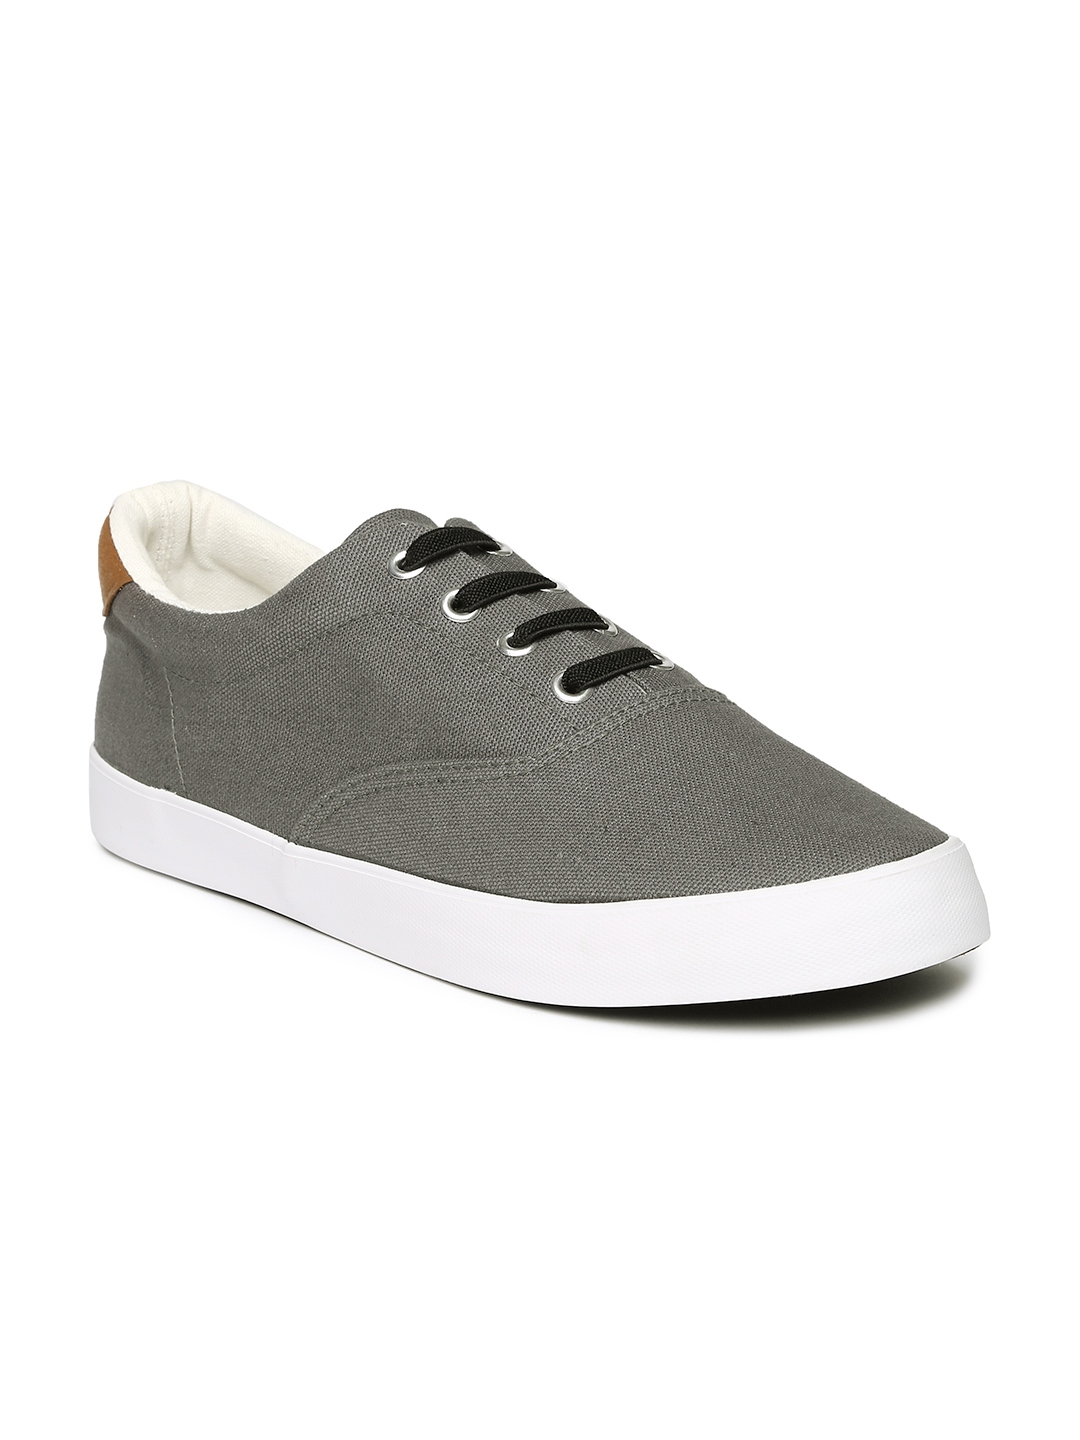 Buy Roadster Men Grey Casual Shoes - Casual Shoes for Men 870867 | Myntra